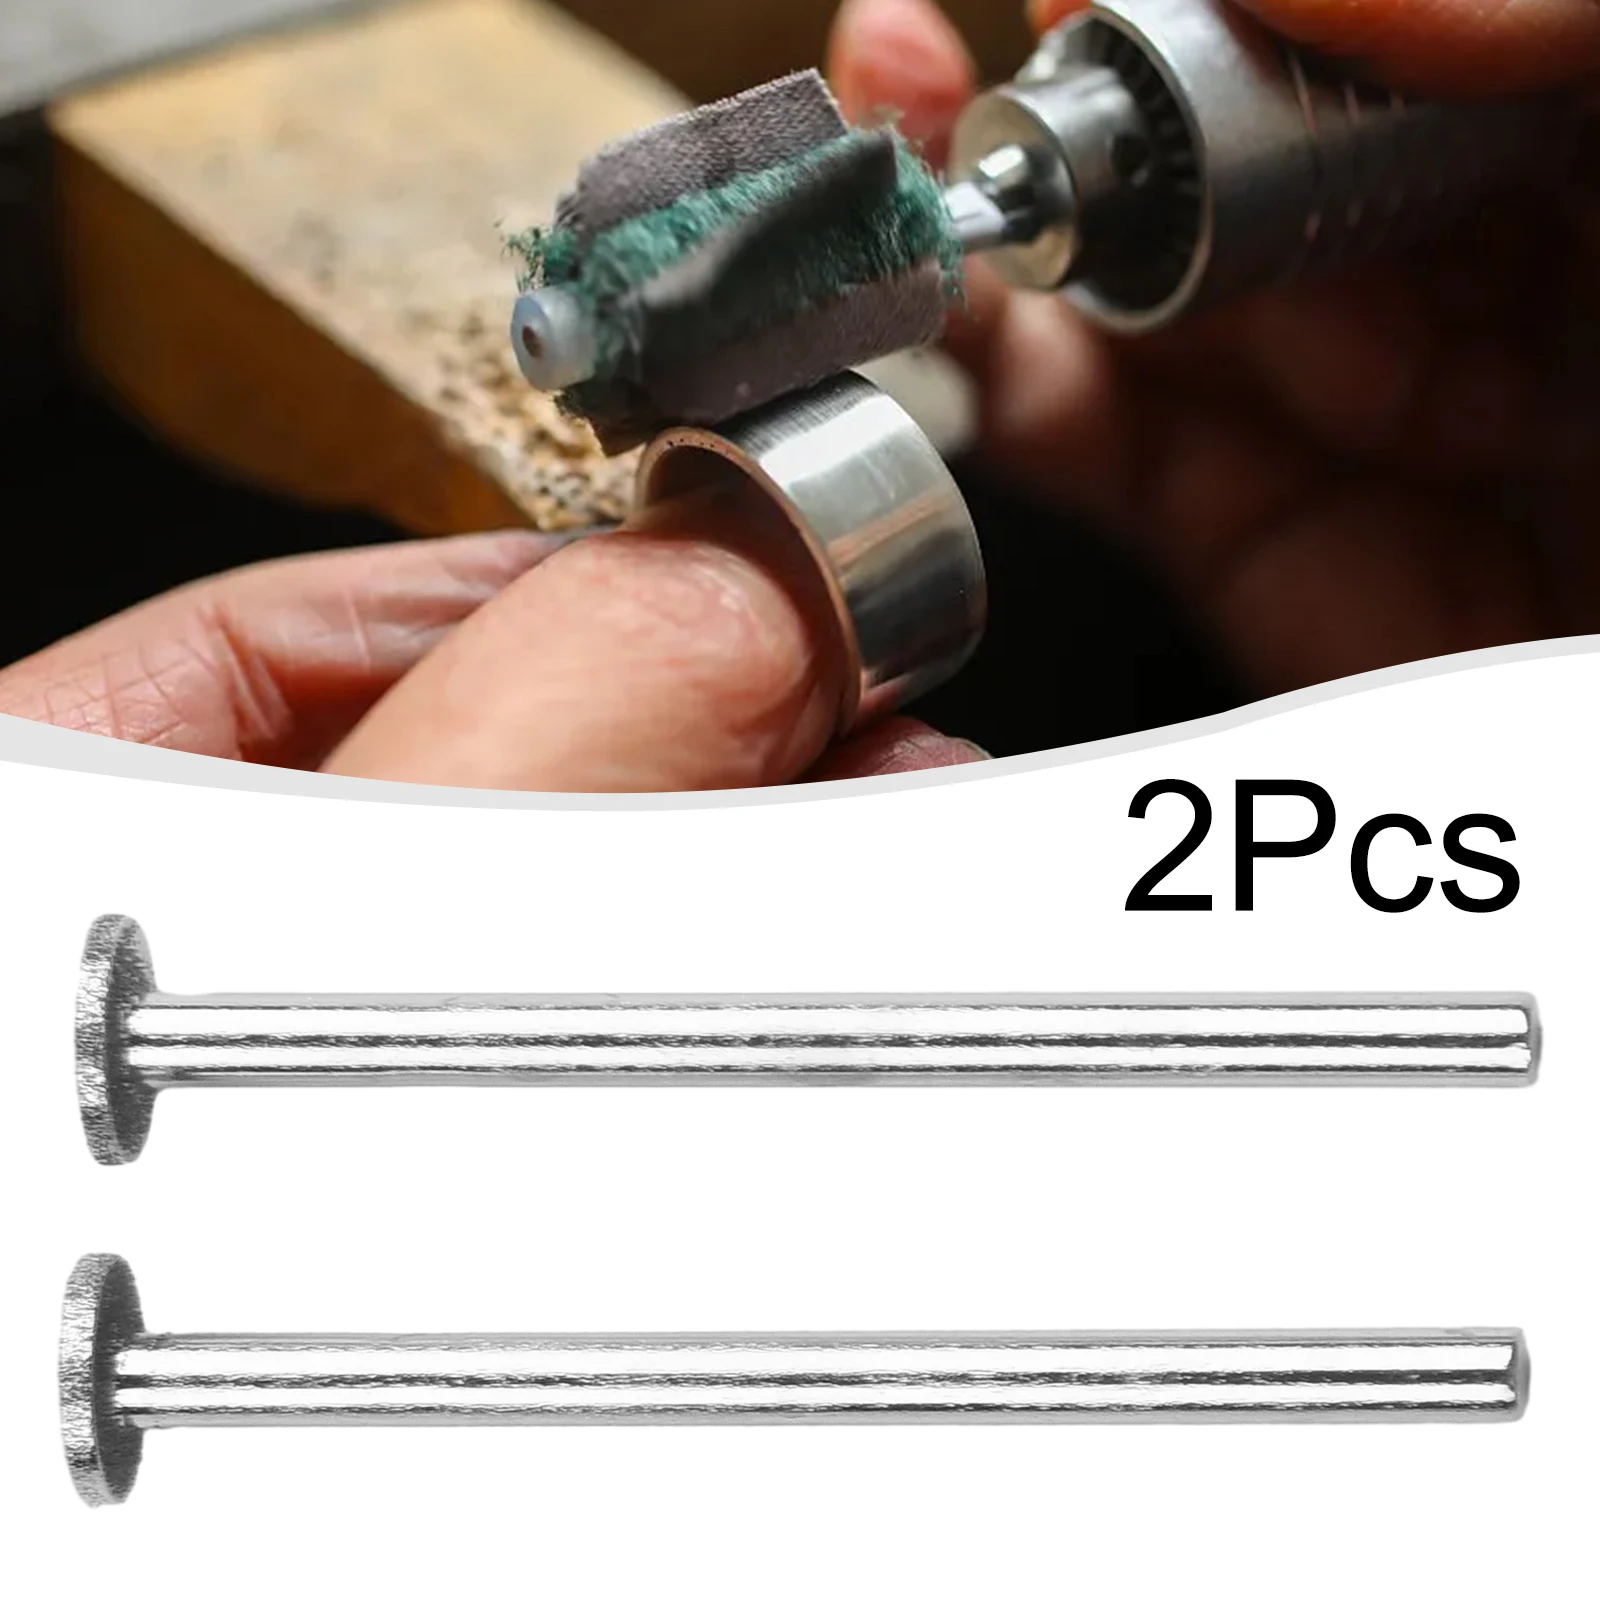 2pcs T Type Grinding Wheel 3mm Shank 6/8/10/10mm Head   45mm Length For The Polishing Of Jade Carving Stone Carving Welding Tool shdiatool 2pcs dia 20mm 5 8 11 thread laser welded diamond dry drilling core bits with side protection hole saw stone drill bits